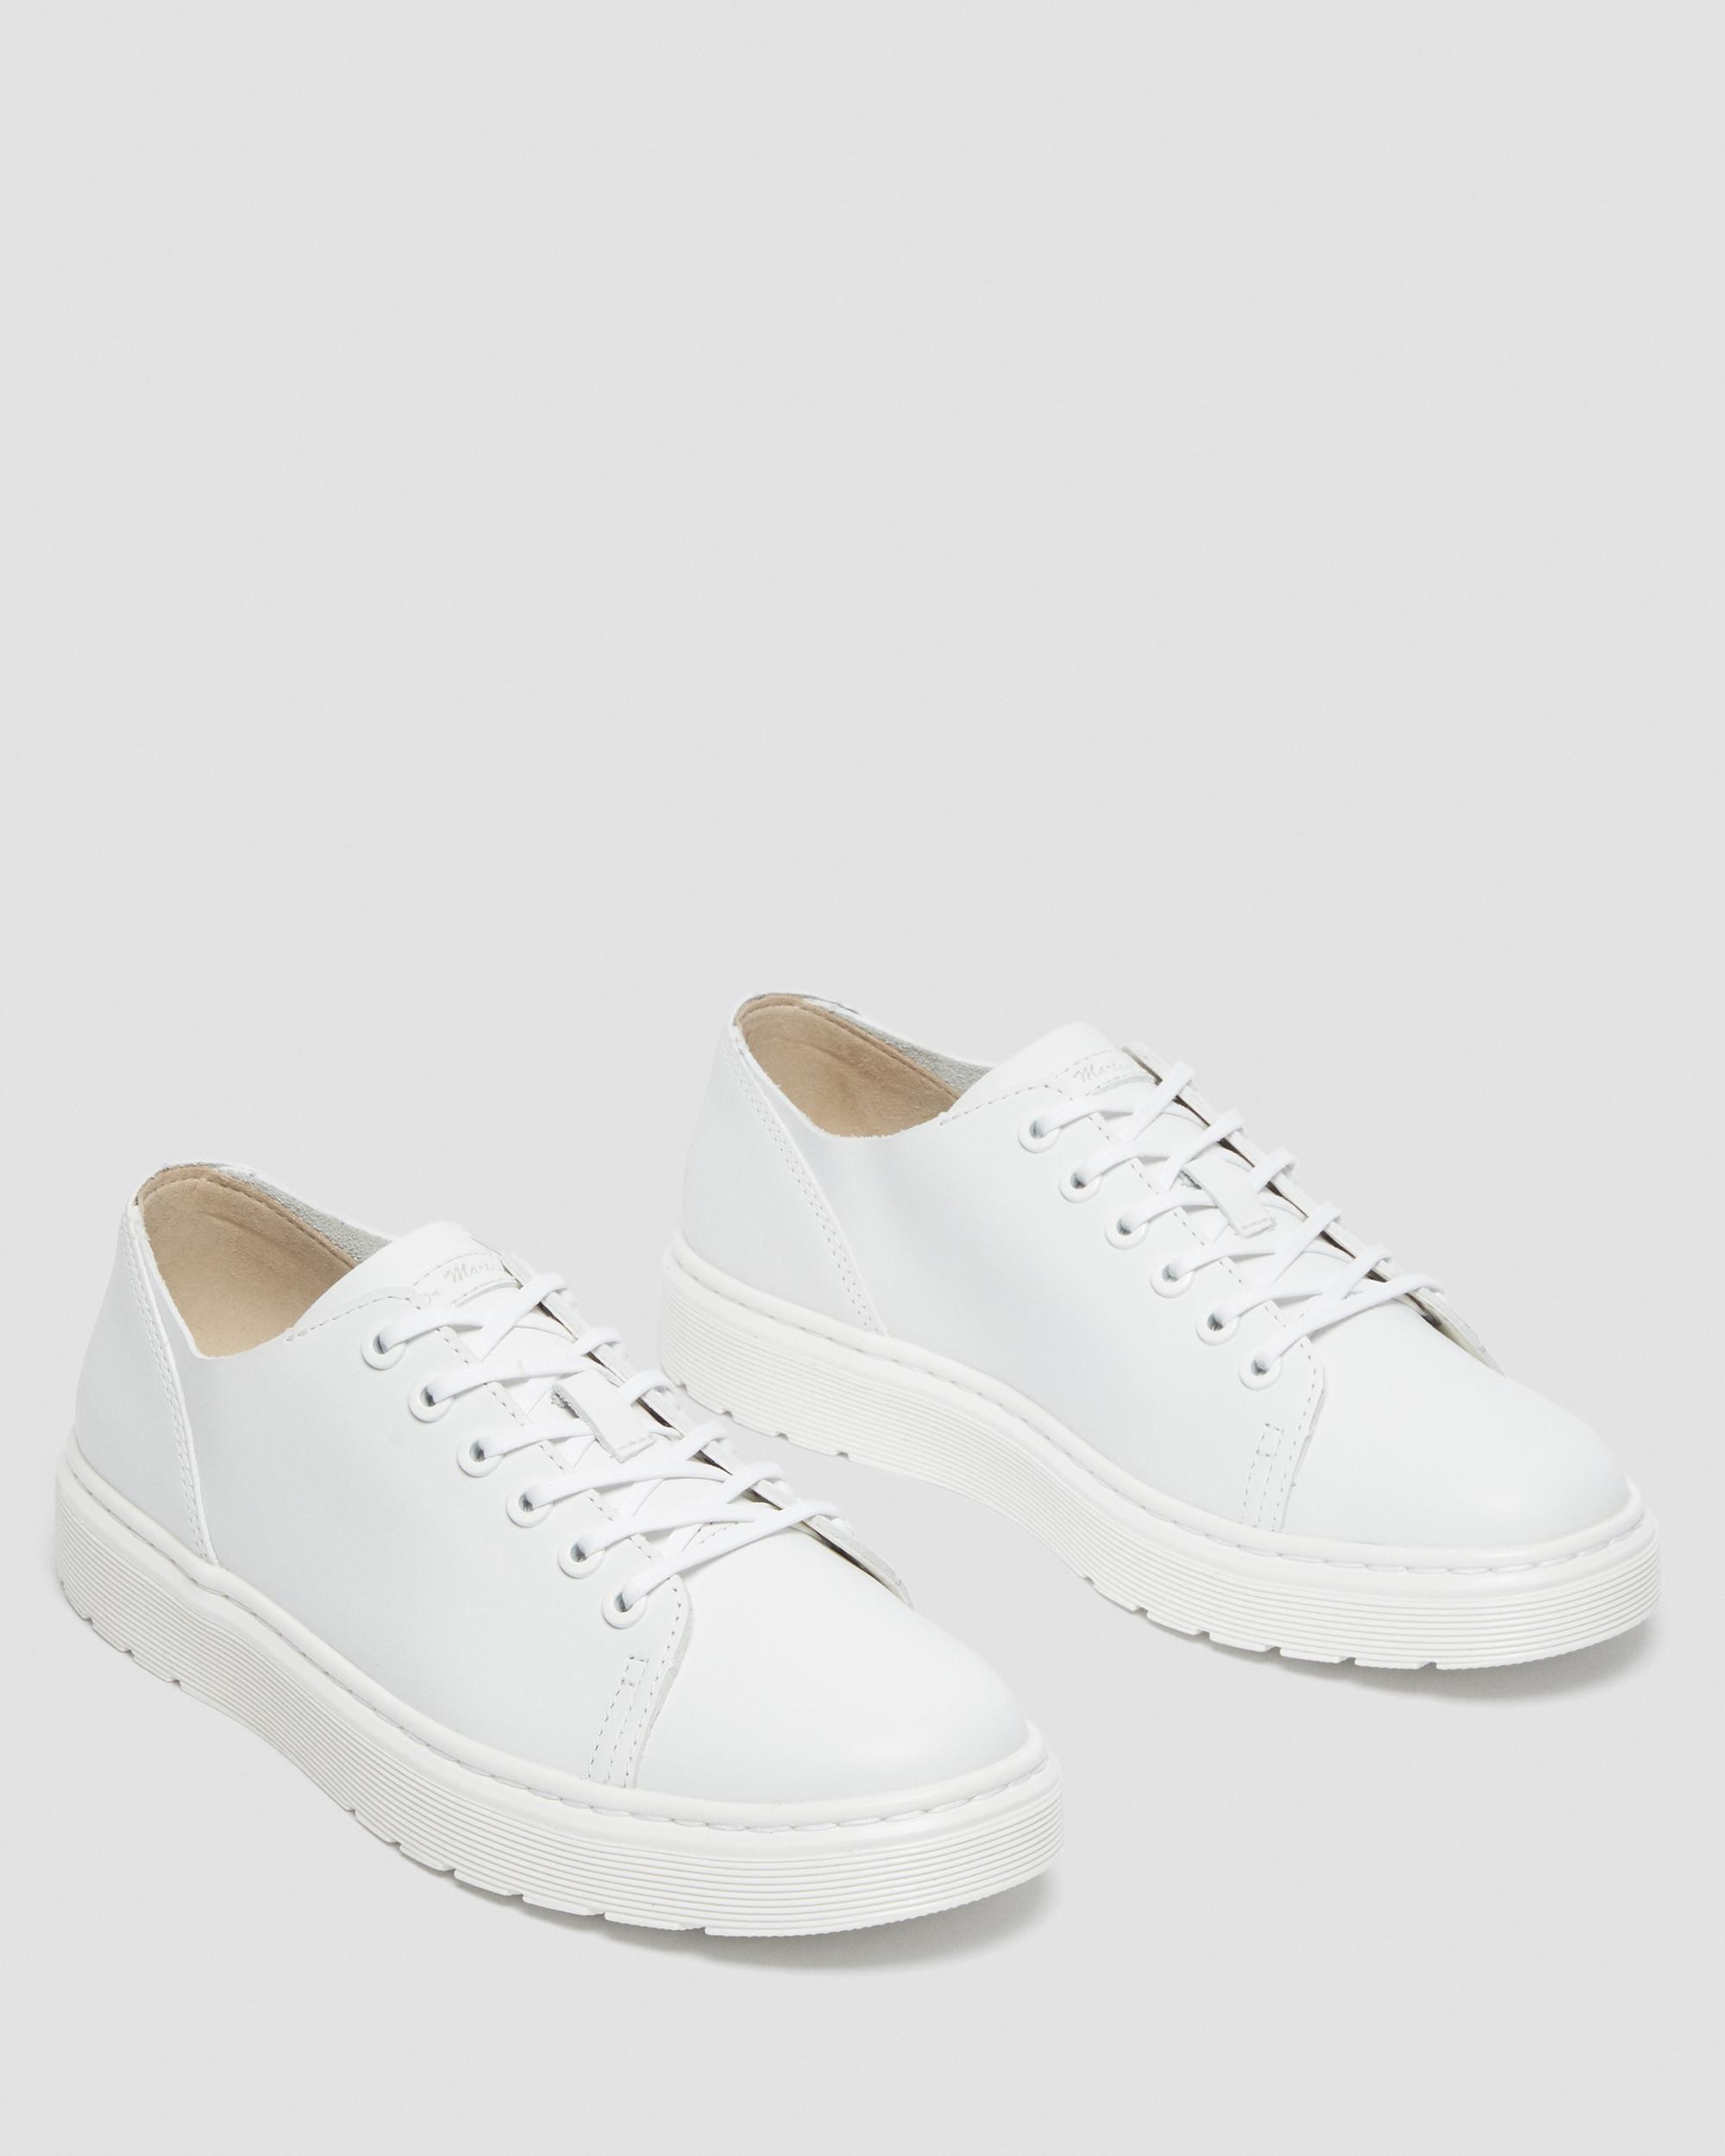 Dante Leather Casual Shoes in White